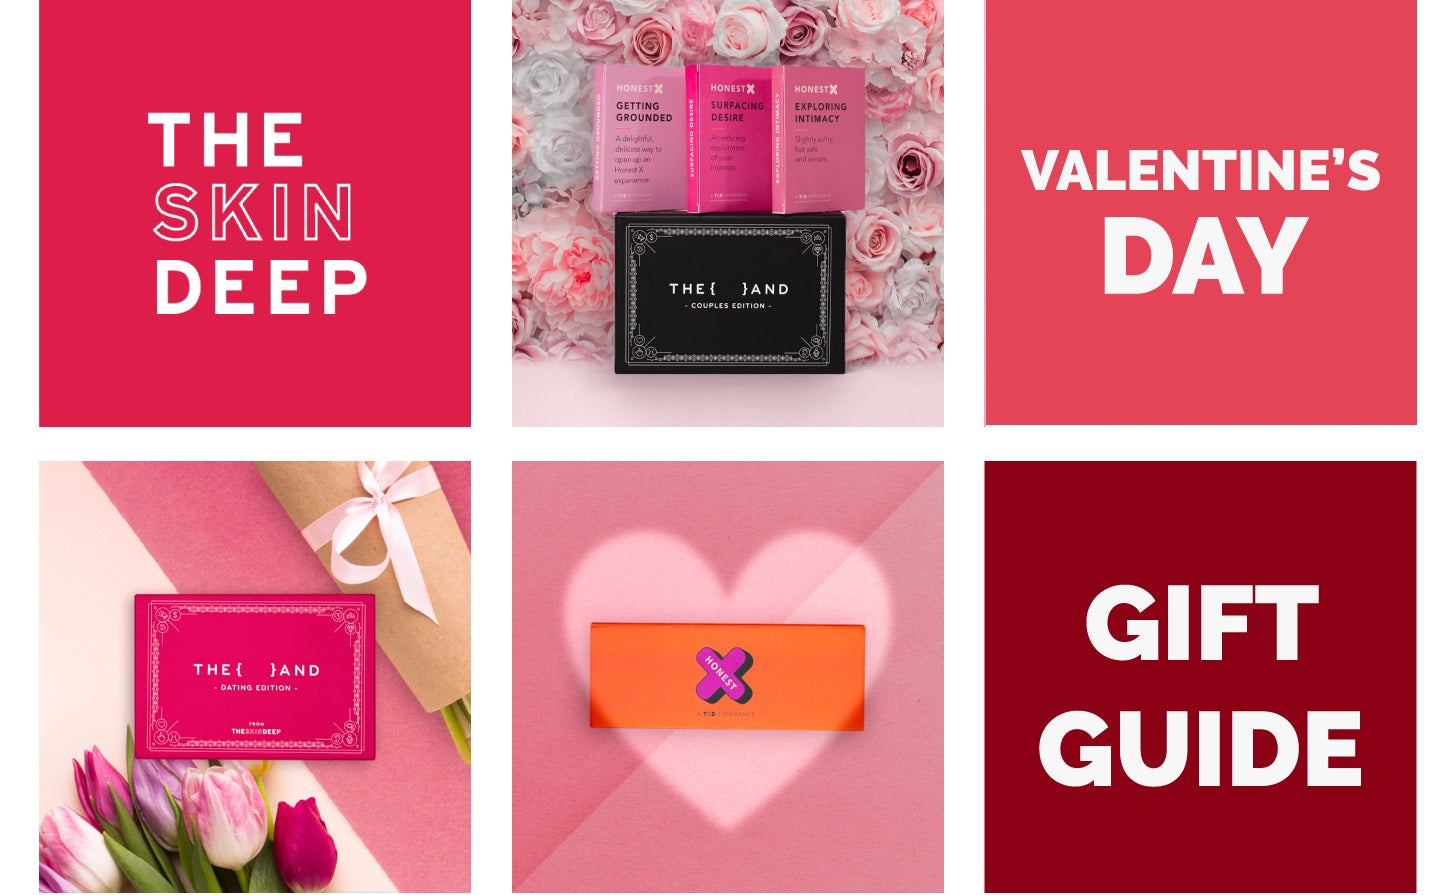 The Skin Deep Valentine's Day Gift Guide